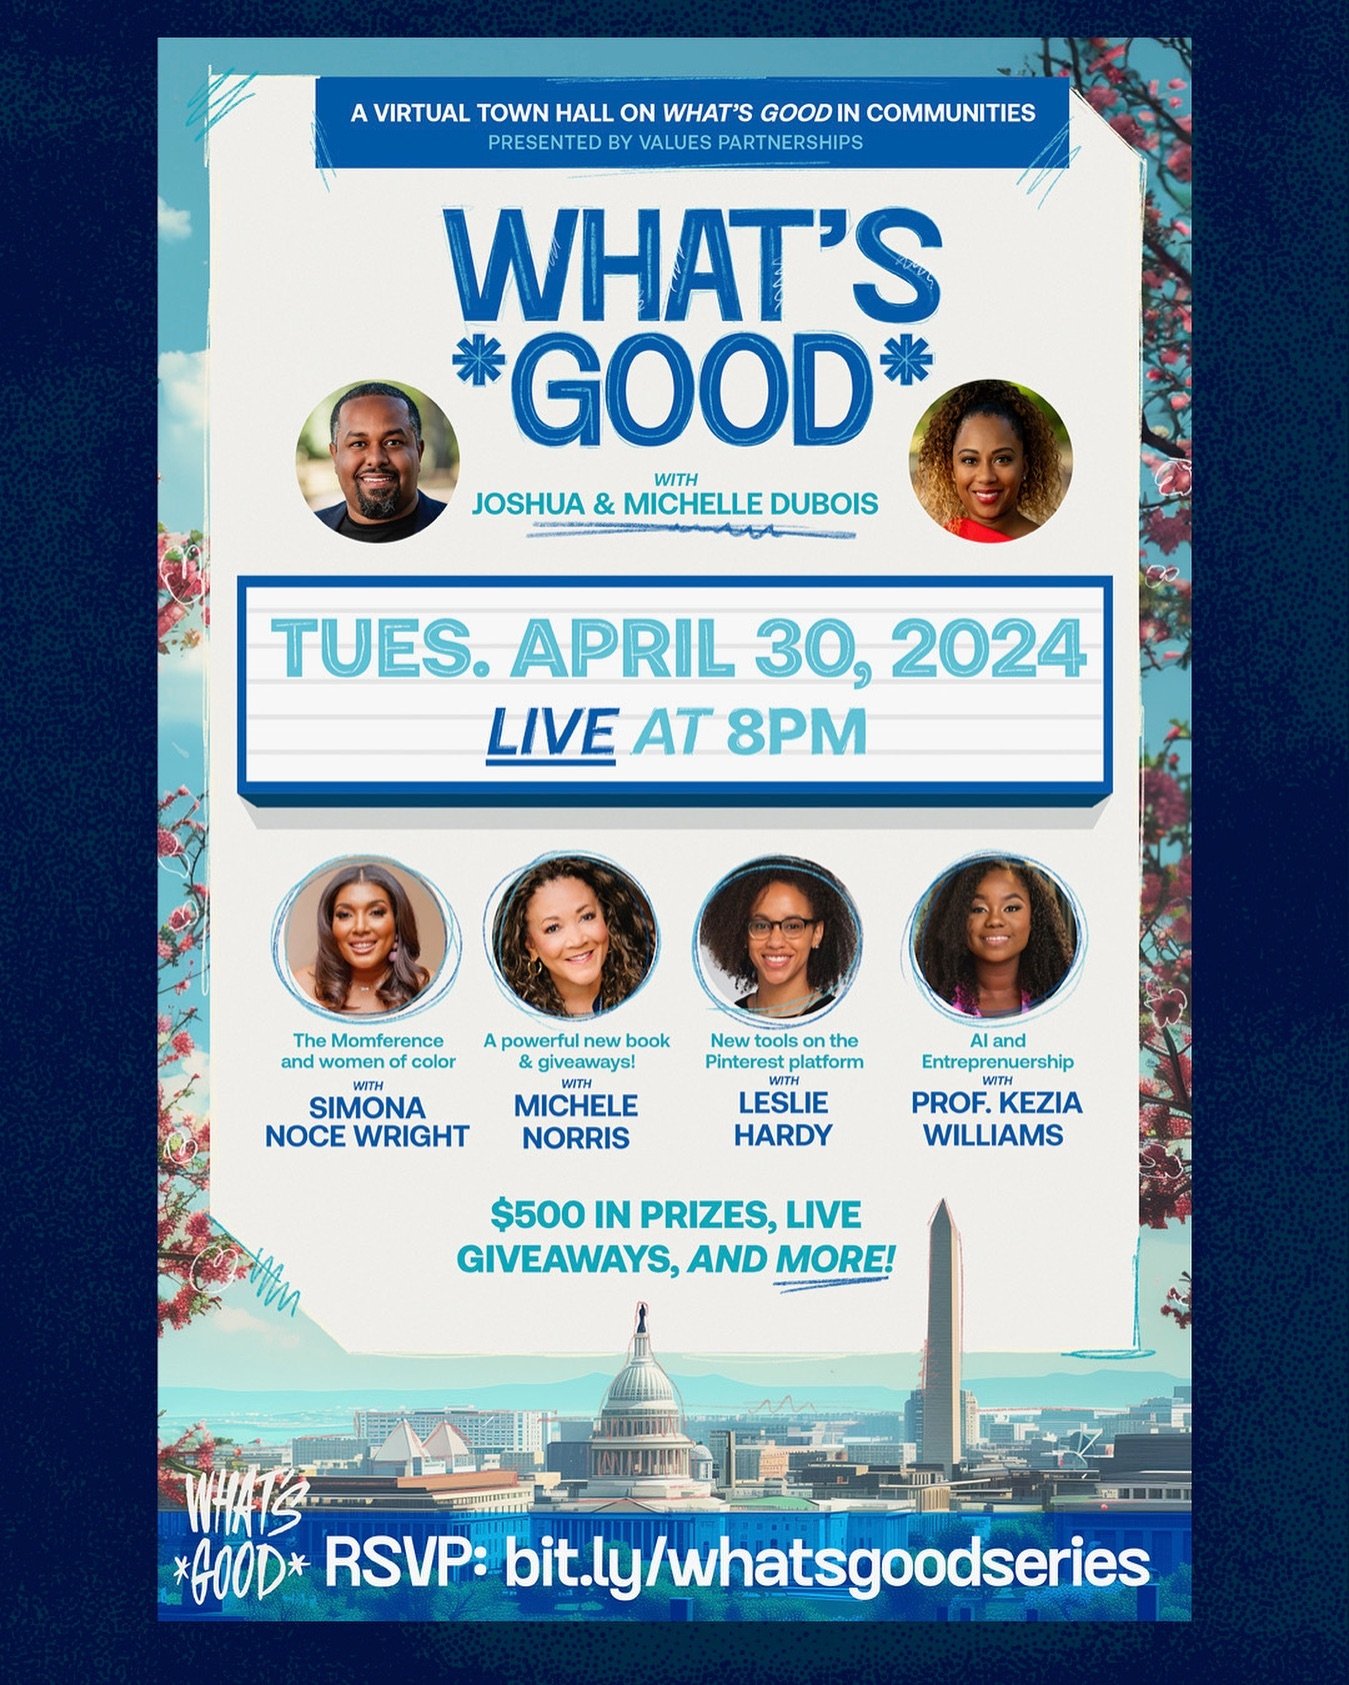 What&rsquo;s Good?  An evening of amazing giveaways, poweful speakers and memorable moments 

Make sure you join us TONIGHT, Tuesday, April 30th at 8pm ET!.

Excited to join this month&rsquo;s virtual Town Hall to discuss my New York Times bestsellin